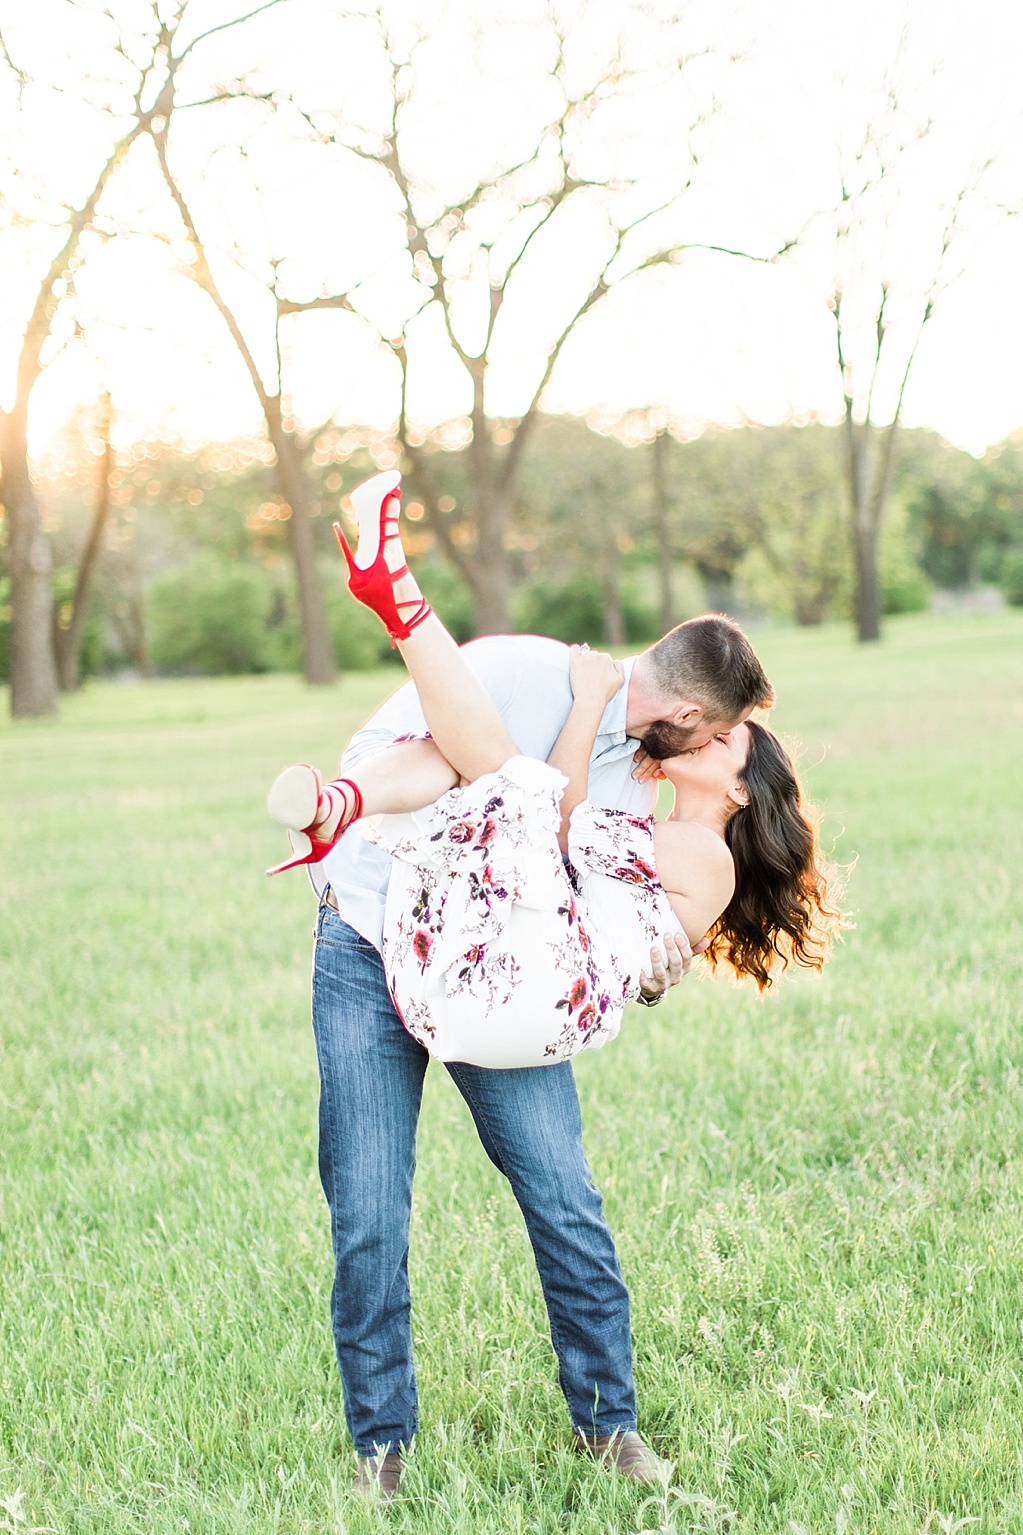 Eagle Dancer Ranch Engagement Photo Session in Boerne, Texas by Allison Jeffers Photography 0039